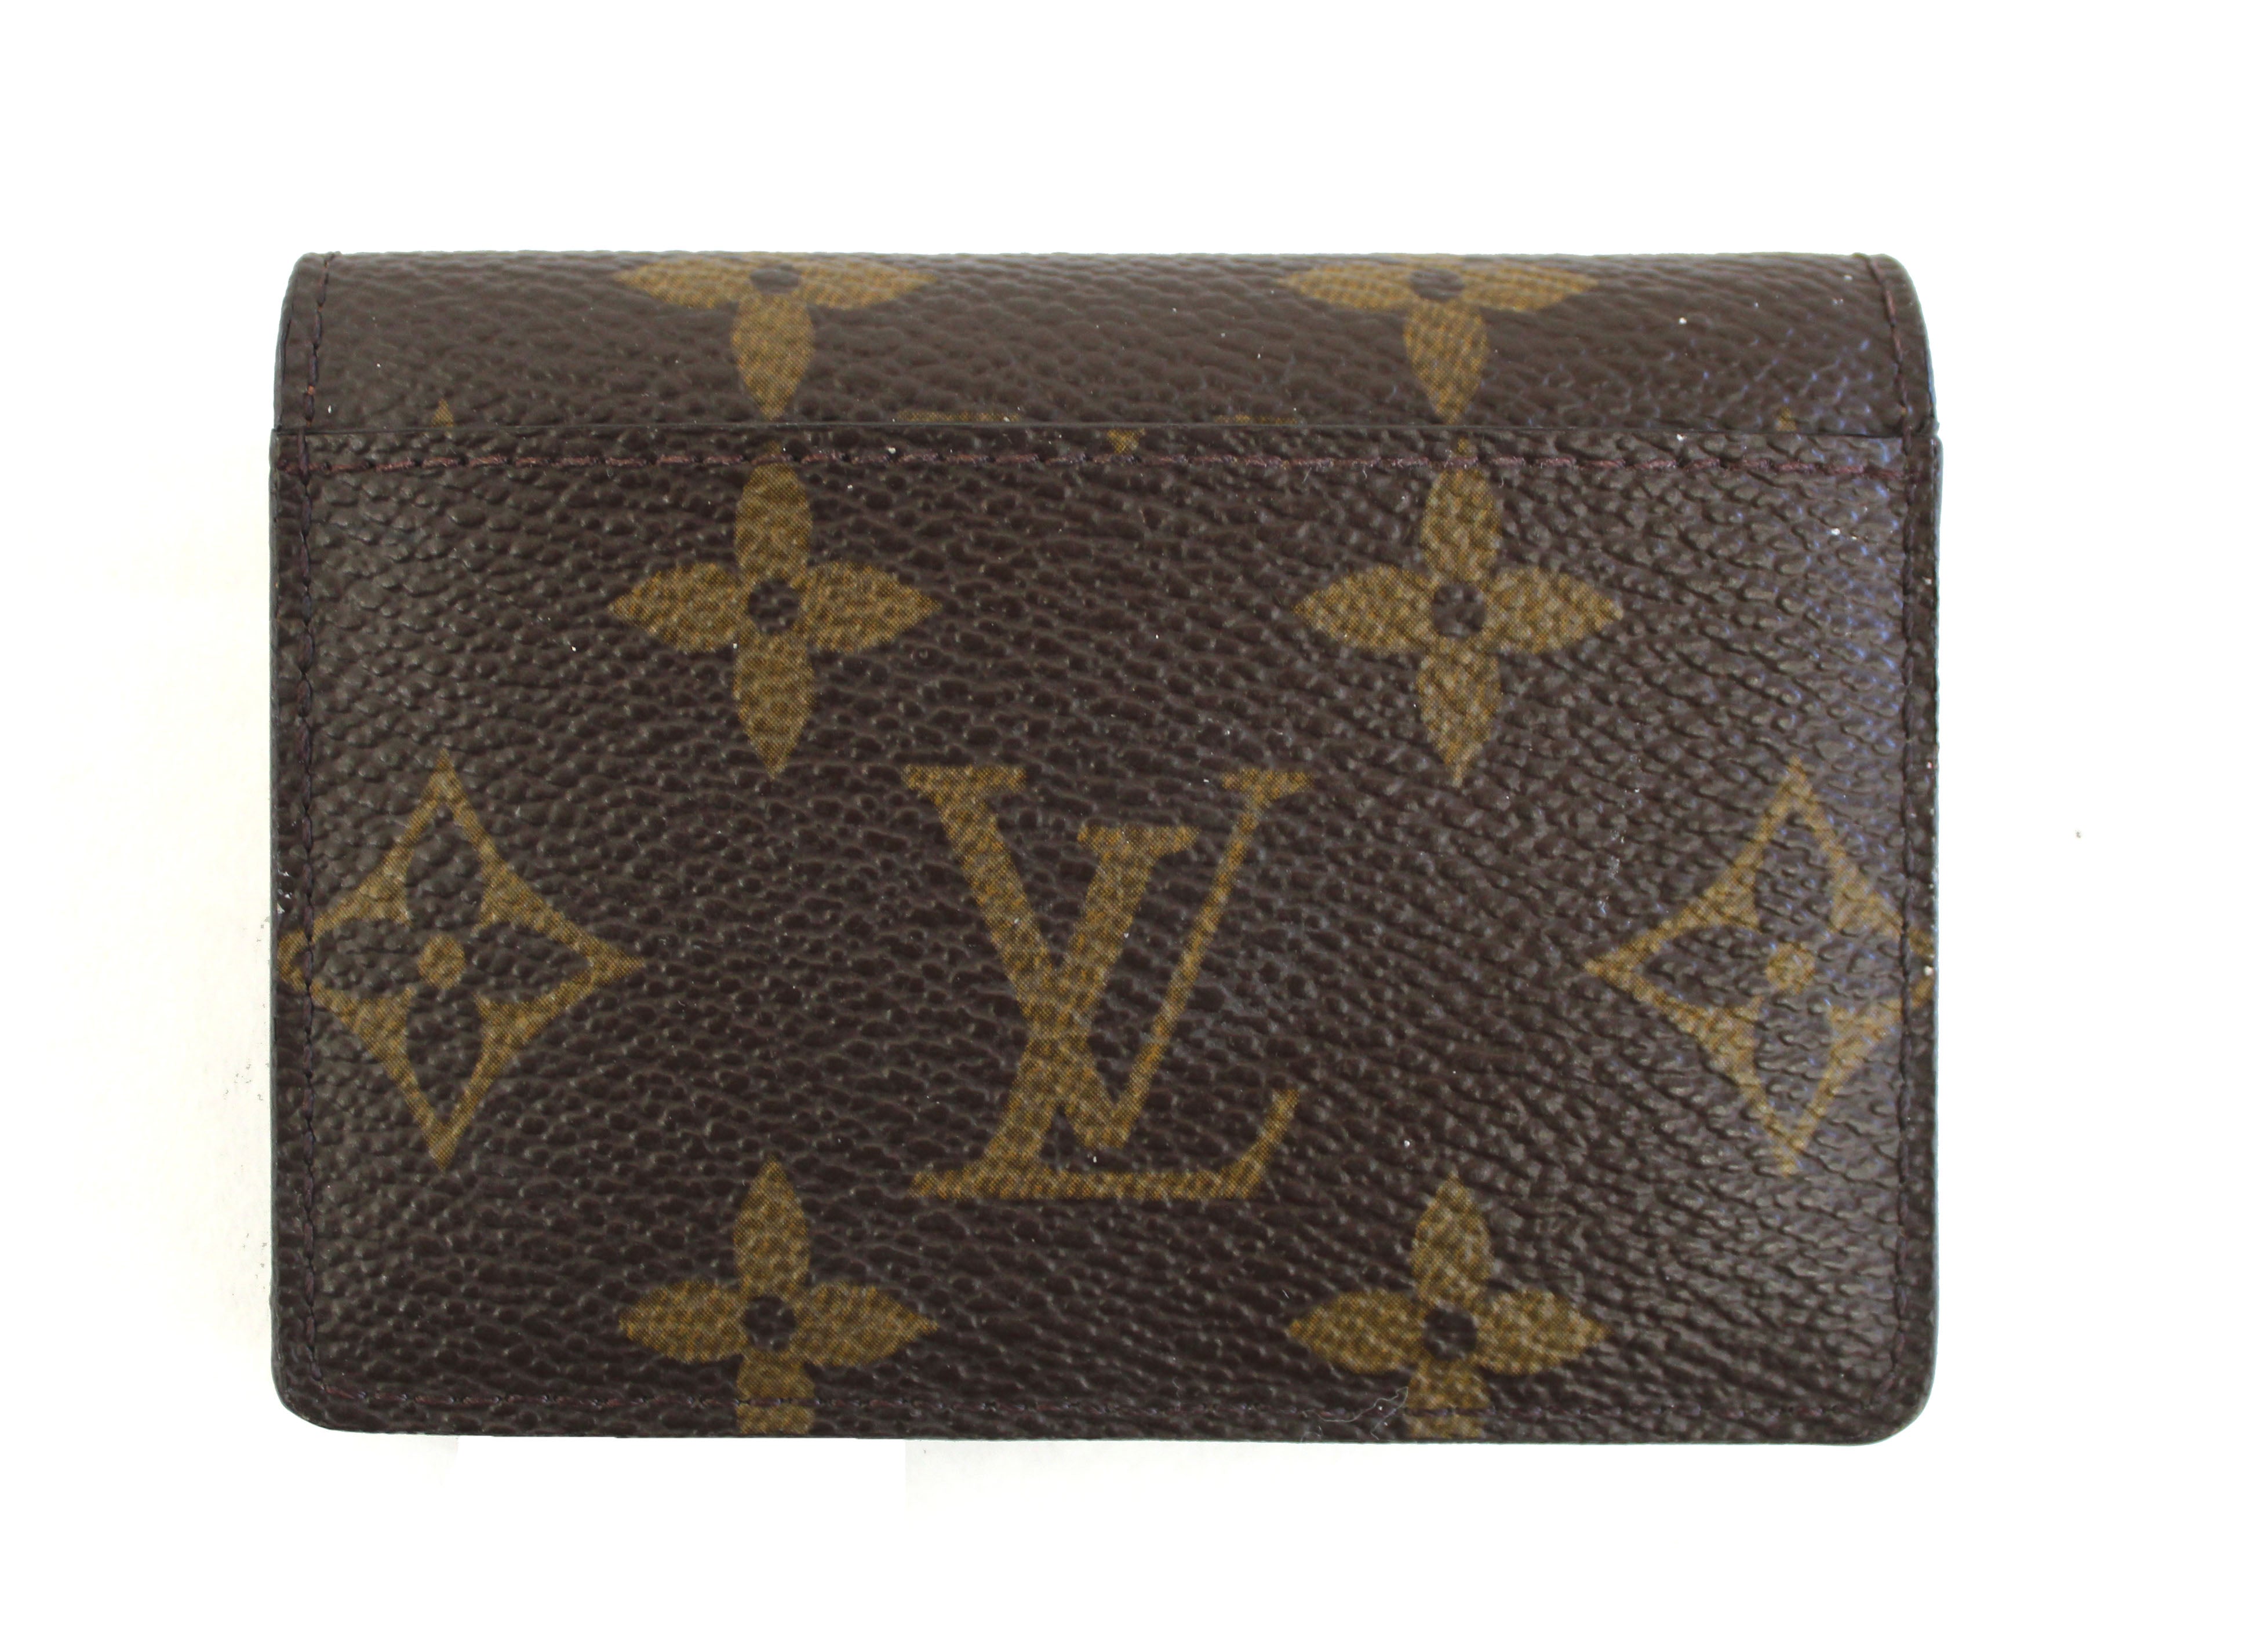 Authentic Louis Vuitton Monogram Canvas Small Card Holder Coin Wallet